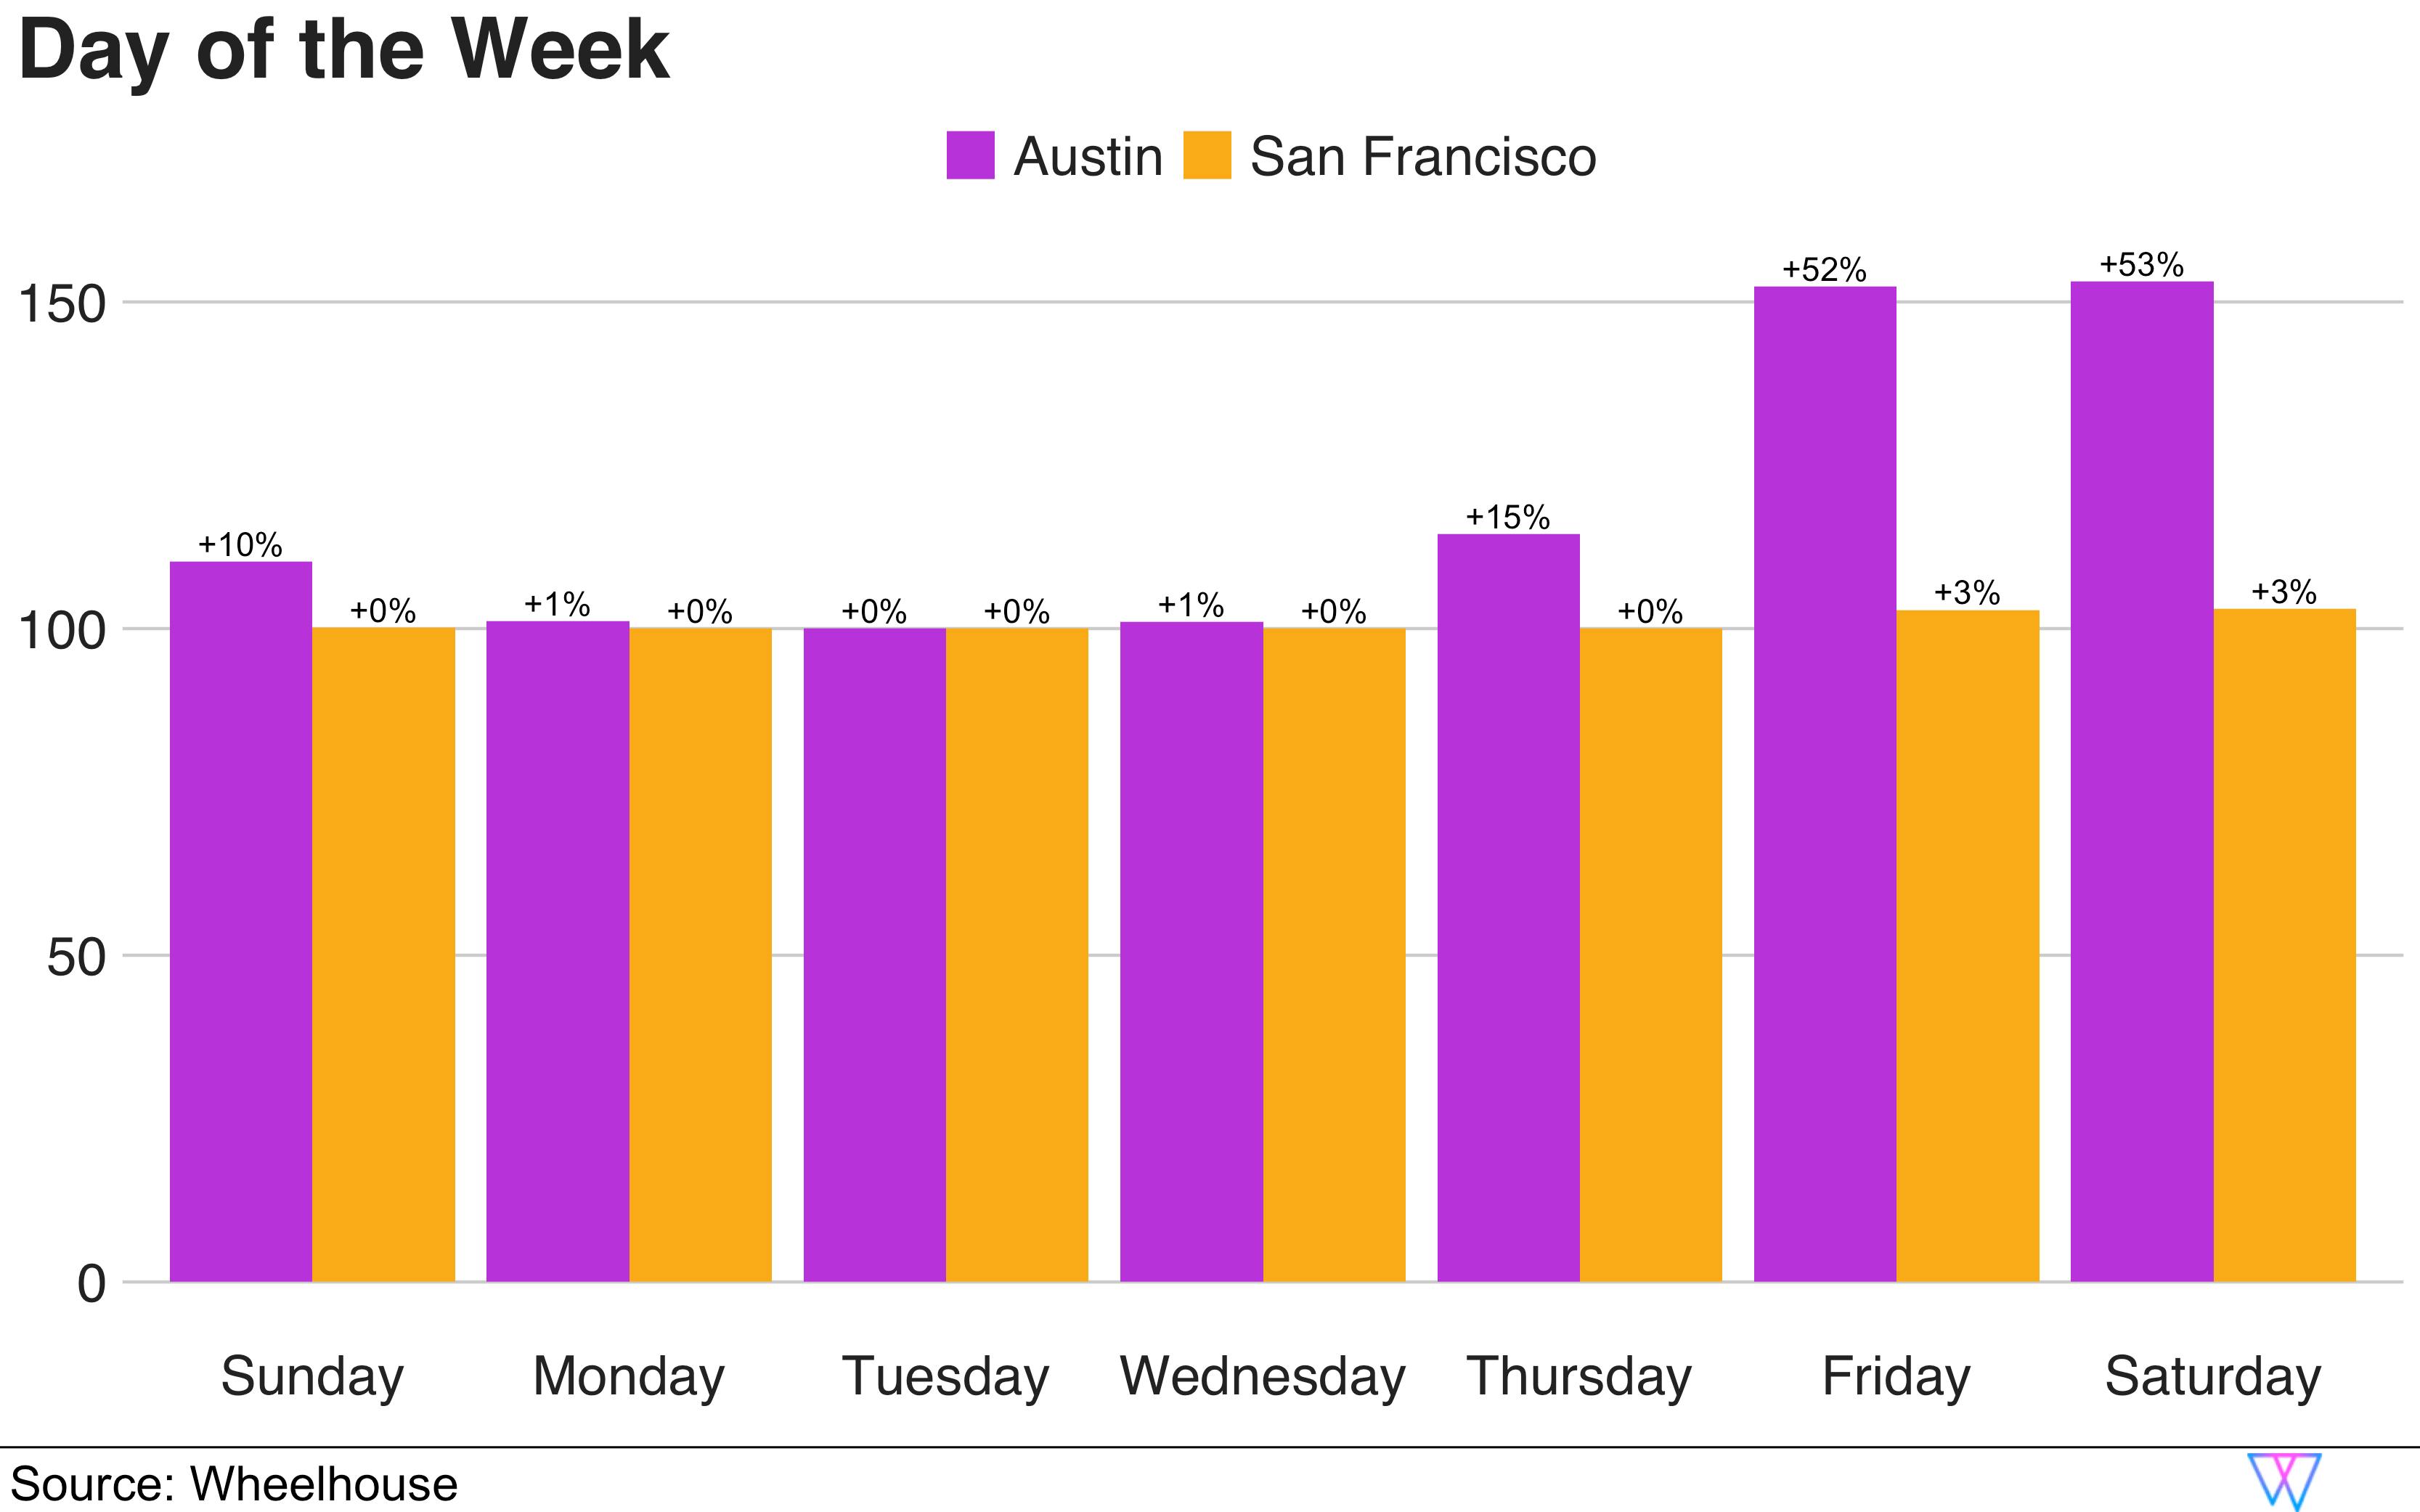 Day of the week comparisons between Austin and San Francisco